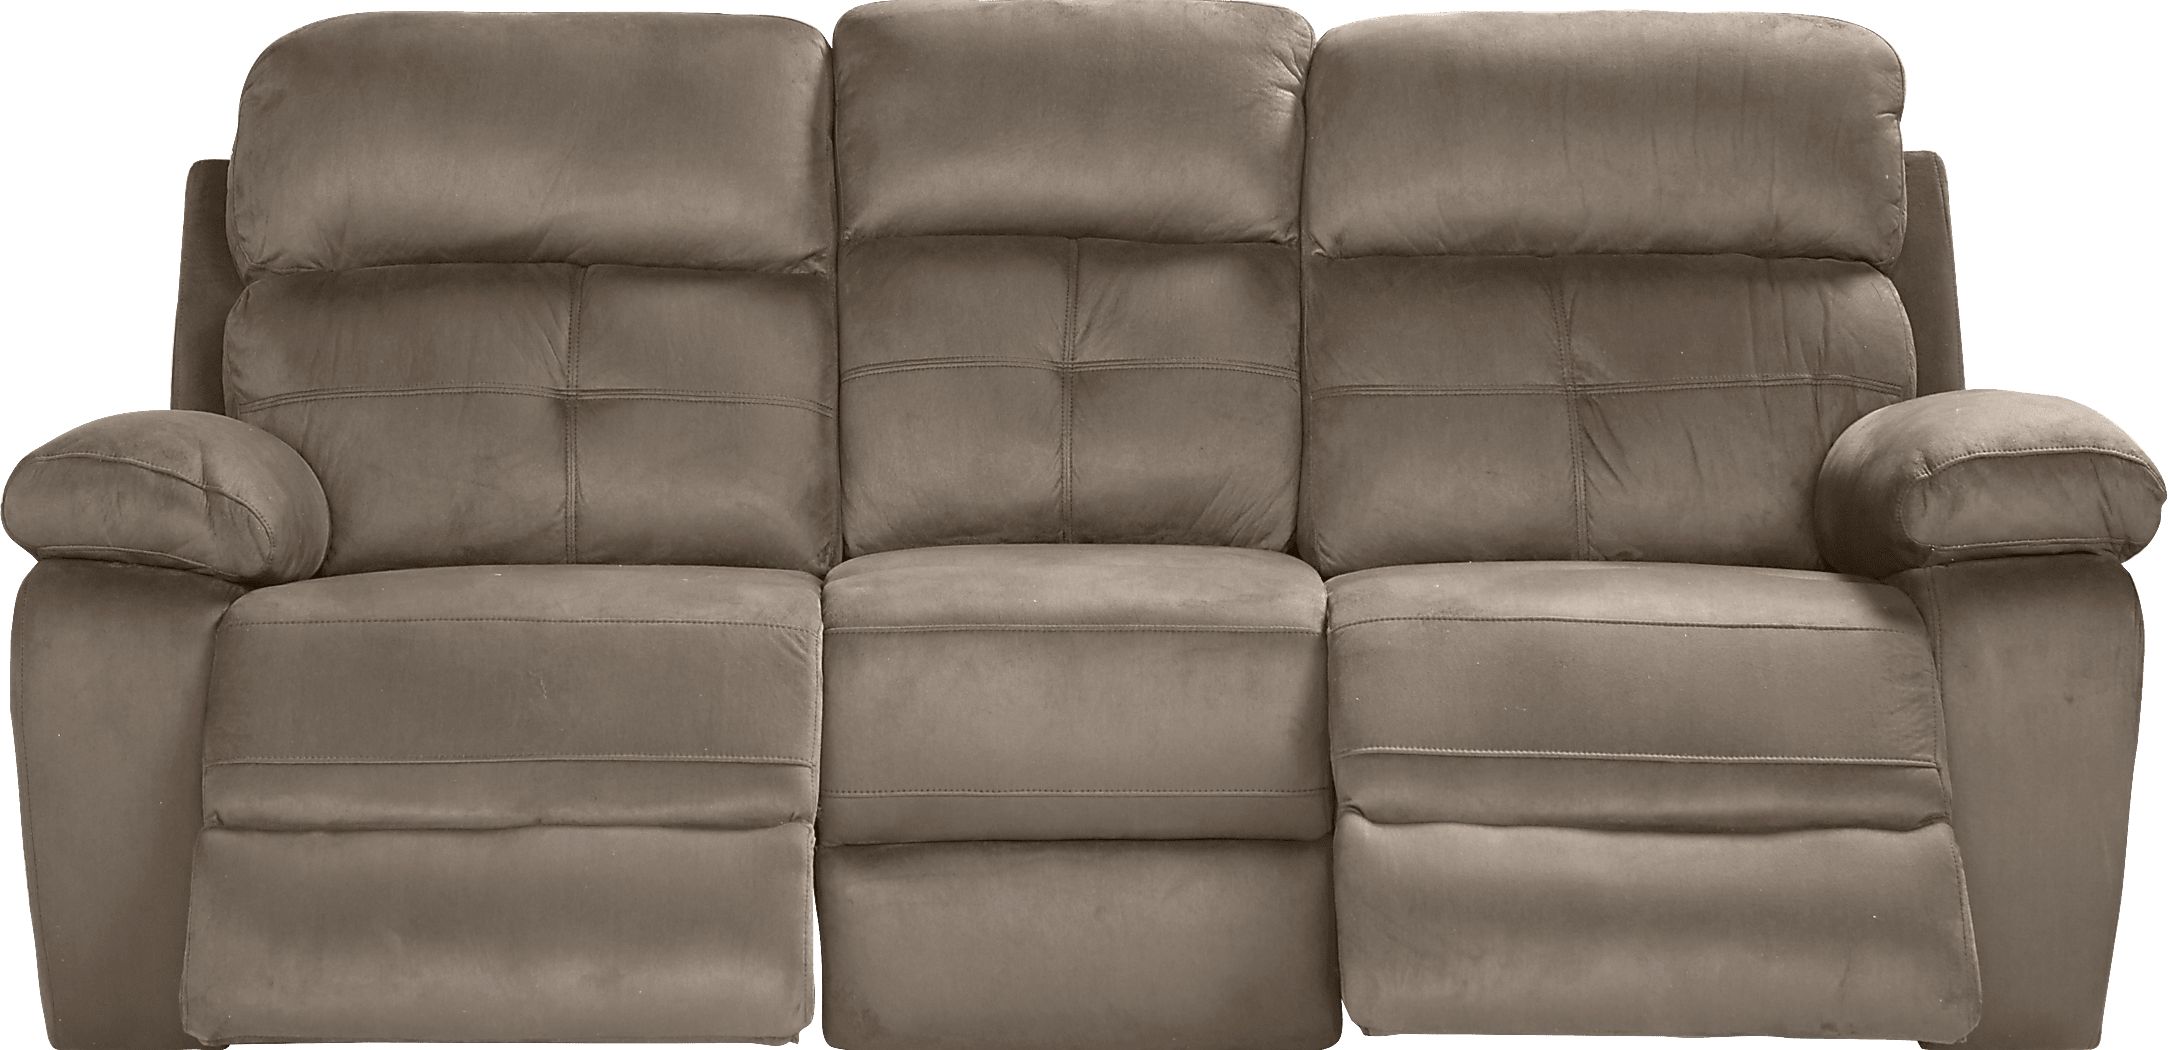 Corinne Stone 2 Pc Living Room with Reclining Sofa